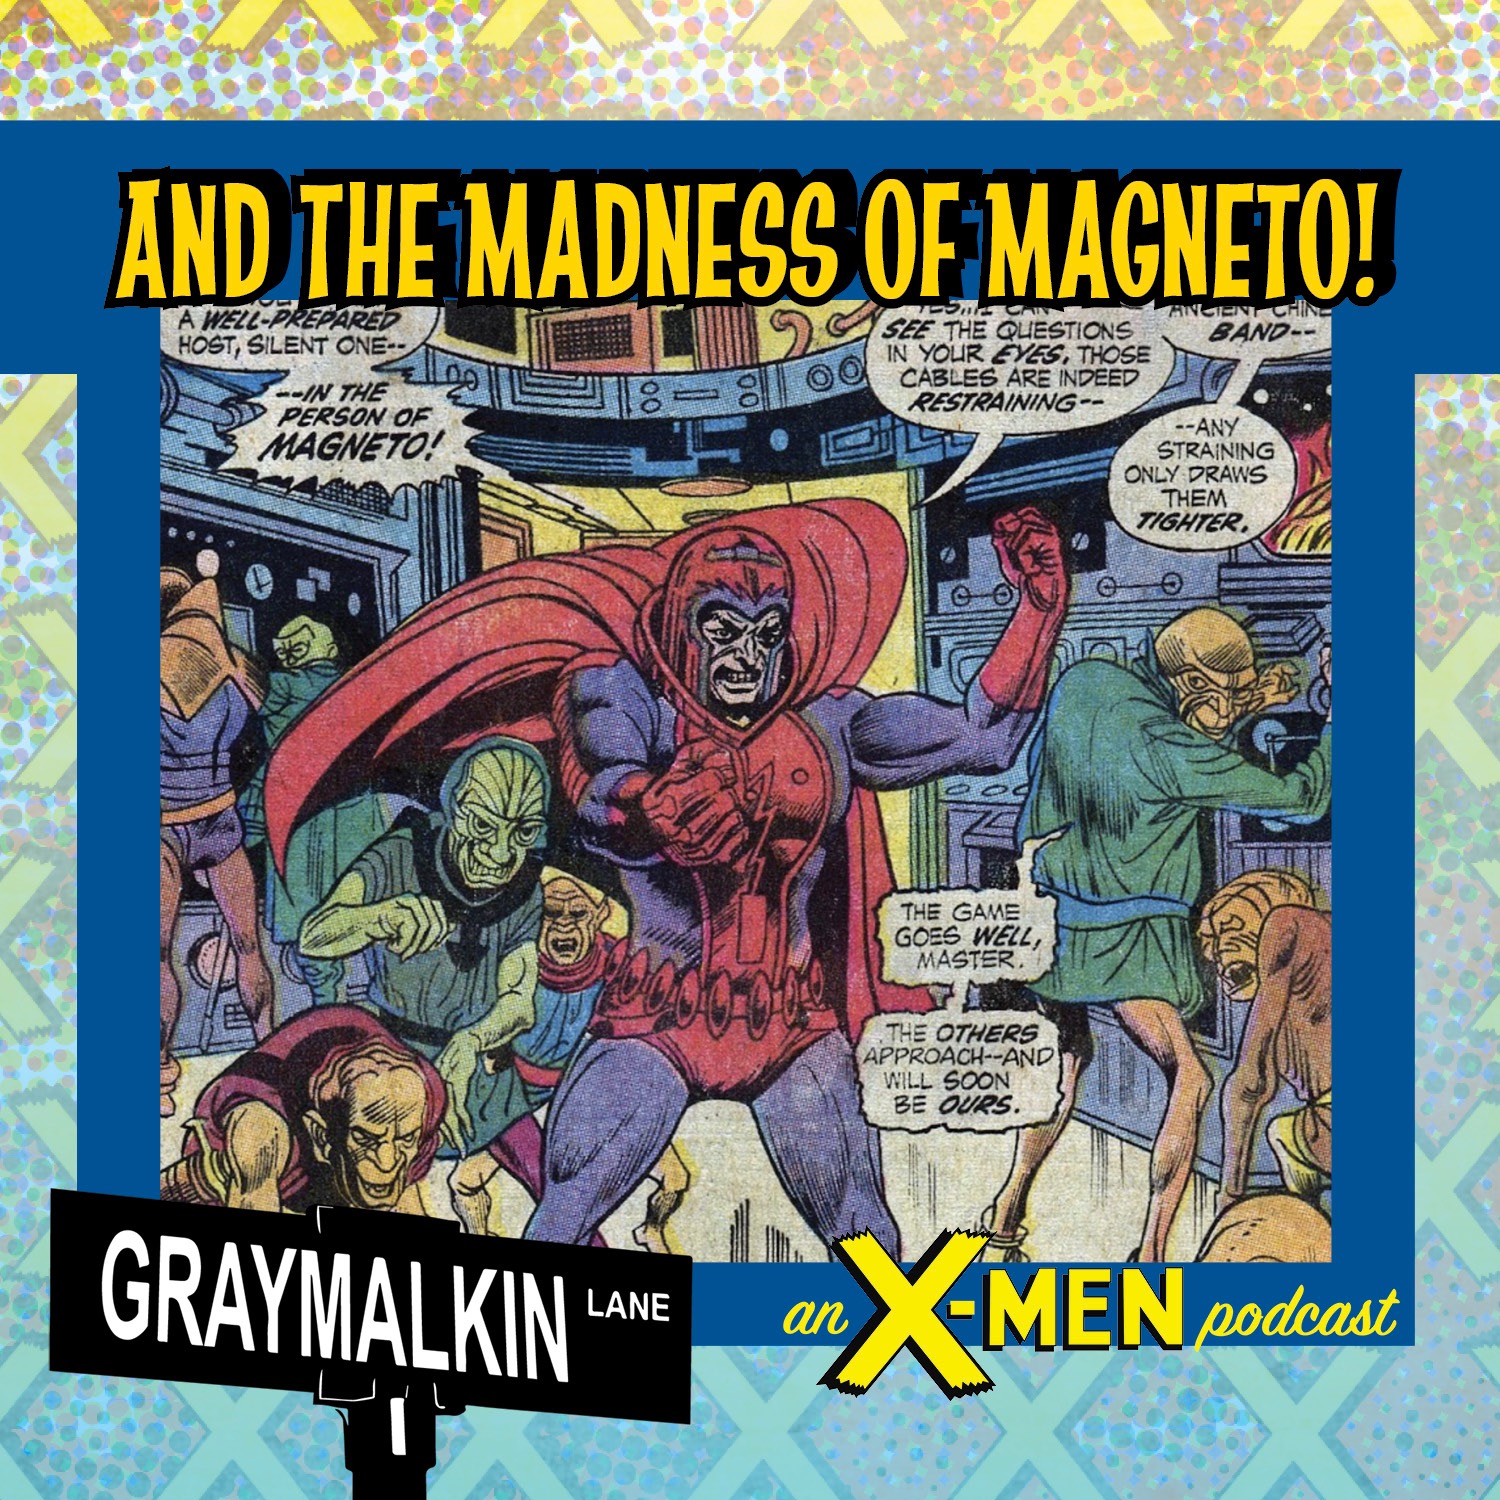 Amazing Adventures 9: And the Madness of Magneto! Featuring CF Villa! Michael Solis! Scotty White!